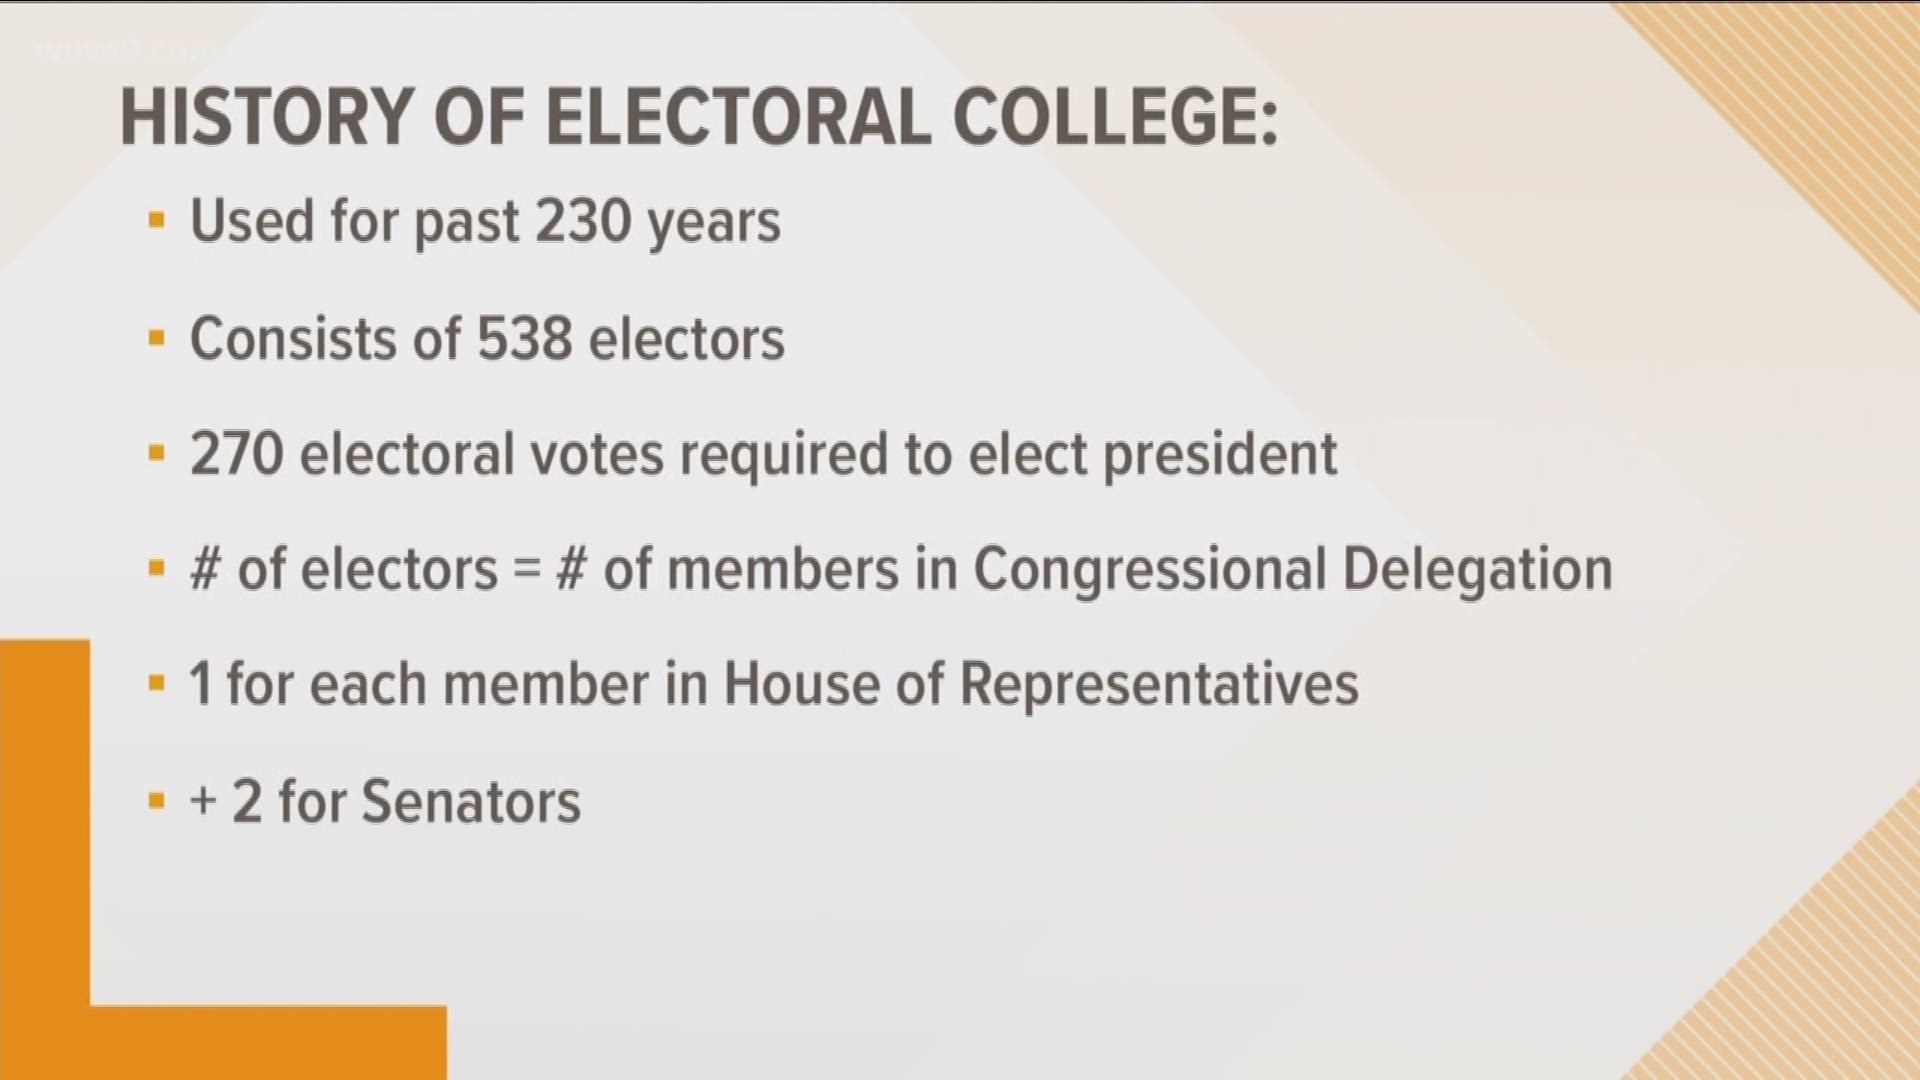 New legislation could change how we vote for our president. Are you in favor of getting rid of the Electoral College?